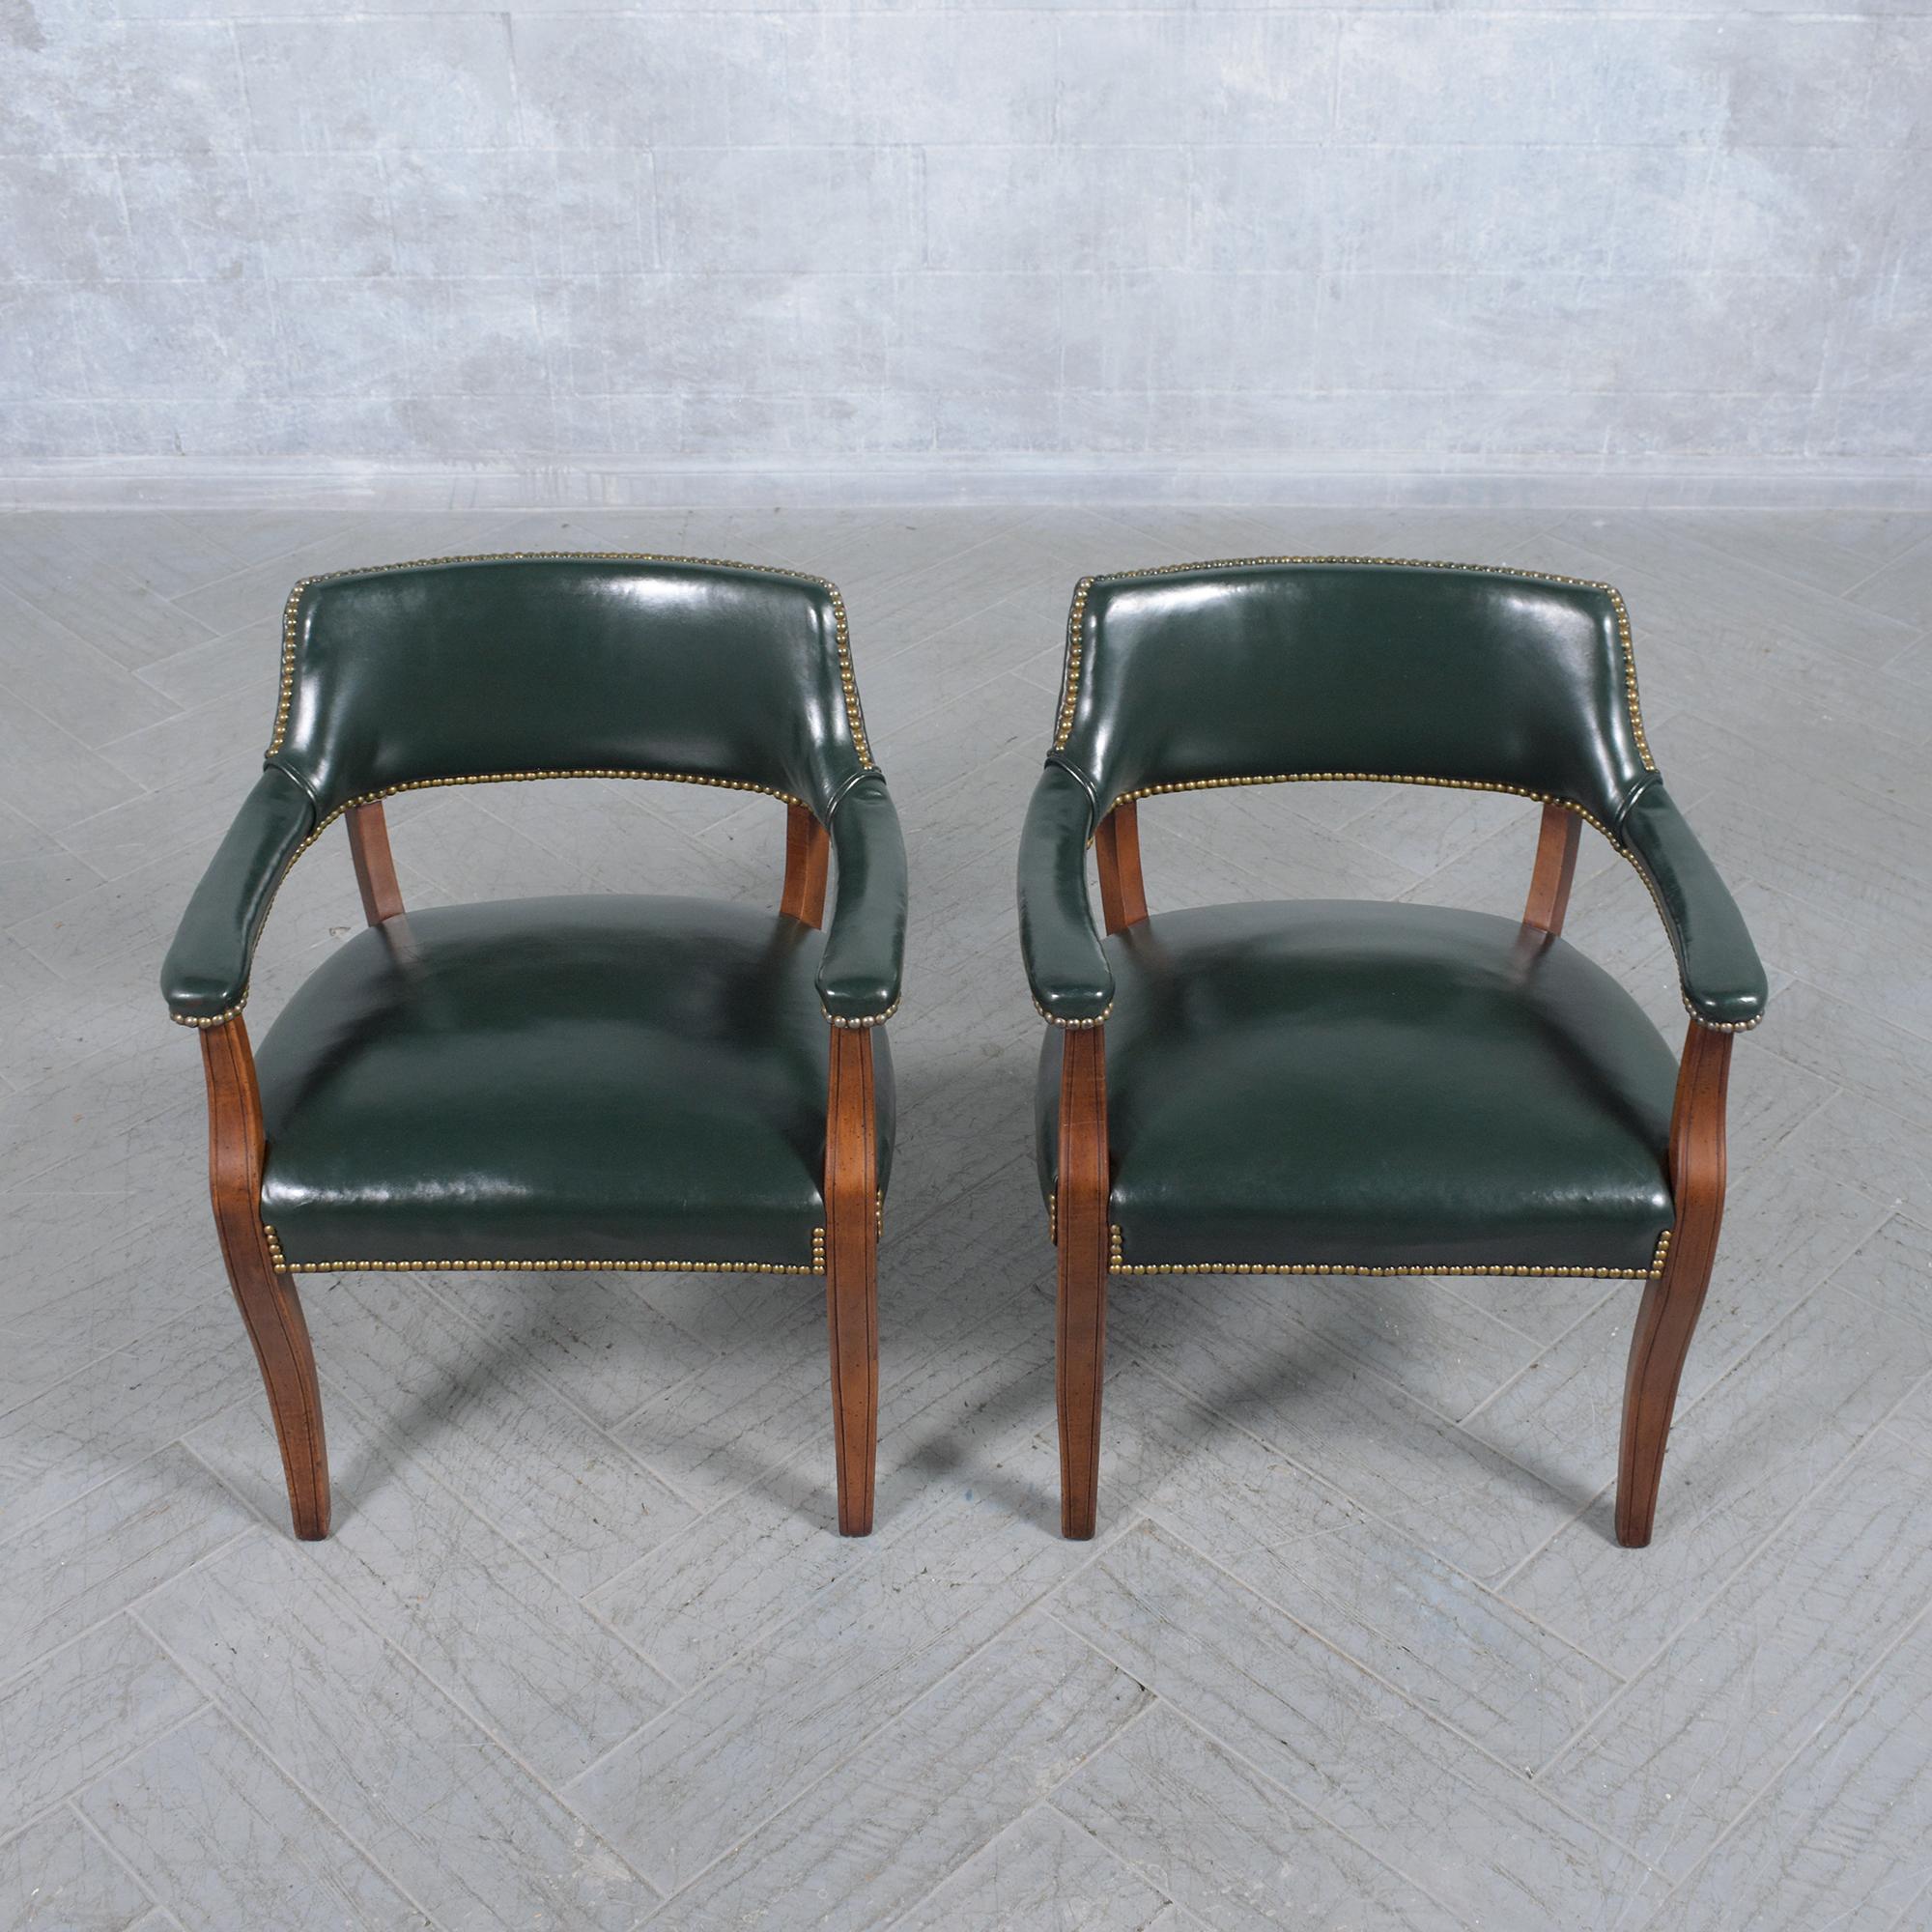 Regency Classic Elegance: Set of 4 Mahogany Barrel Armchairs with Emerald Leather For Sale